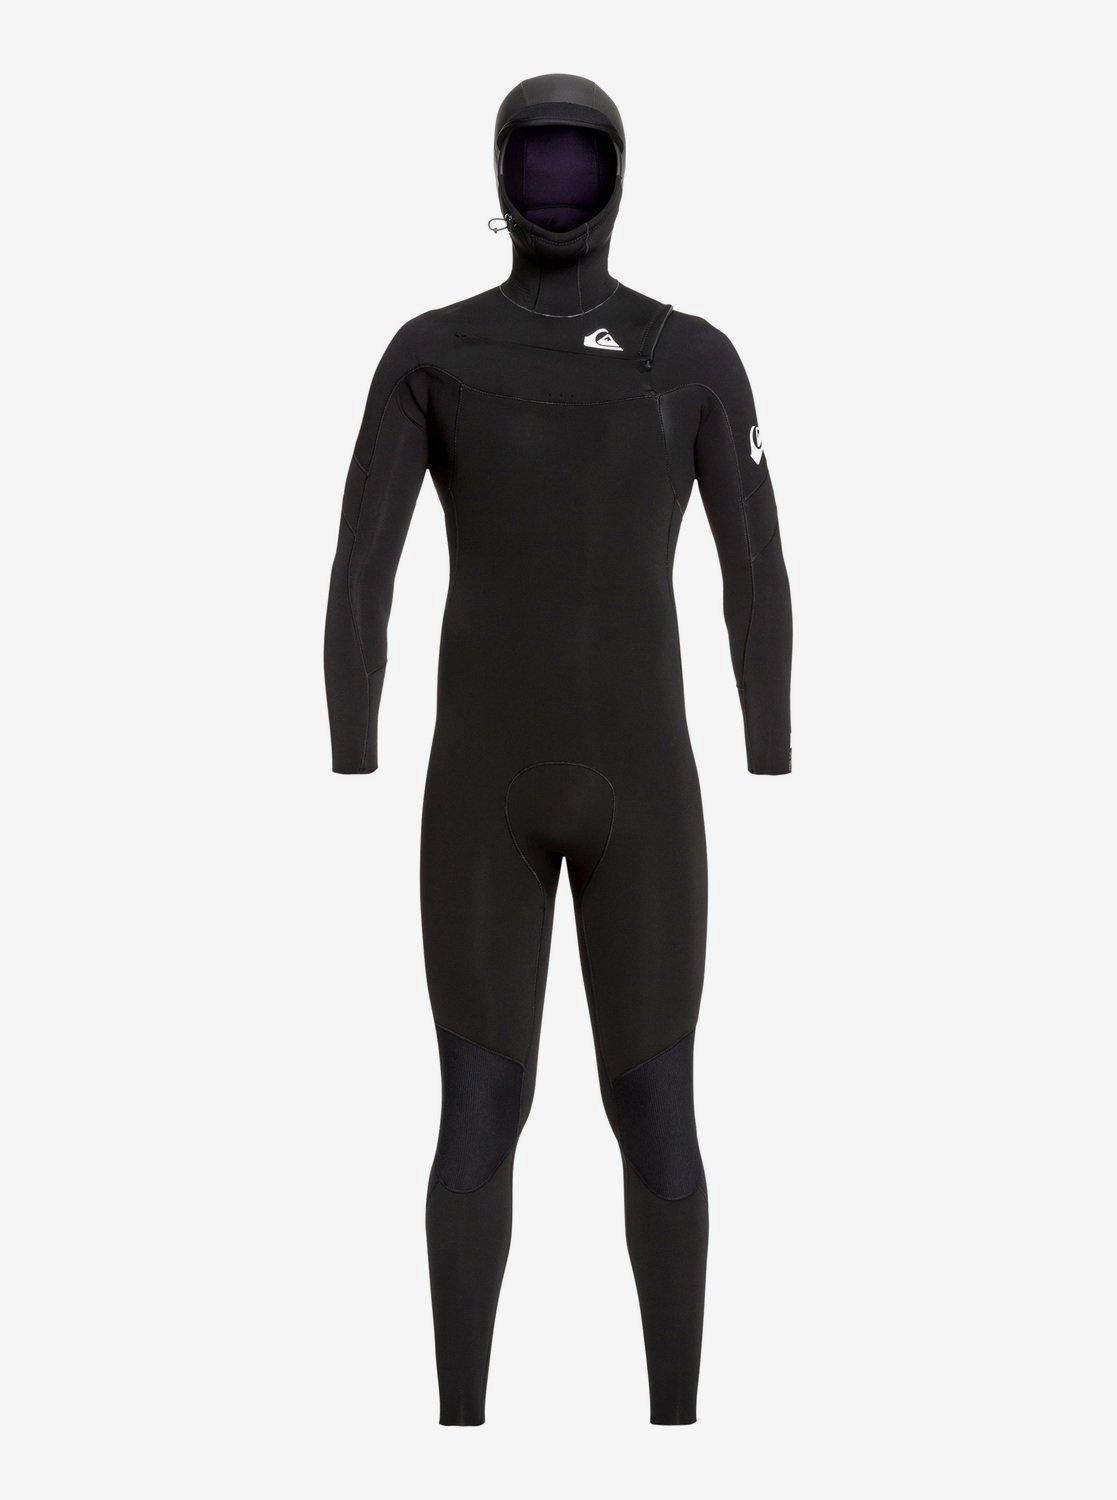 Quiksilver Syncro 5/4/3mm Hooded Wetsuit - Chest Zip - Urban Surf